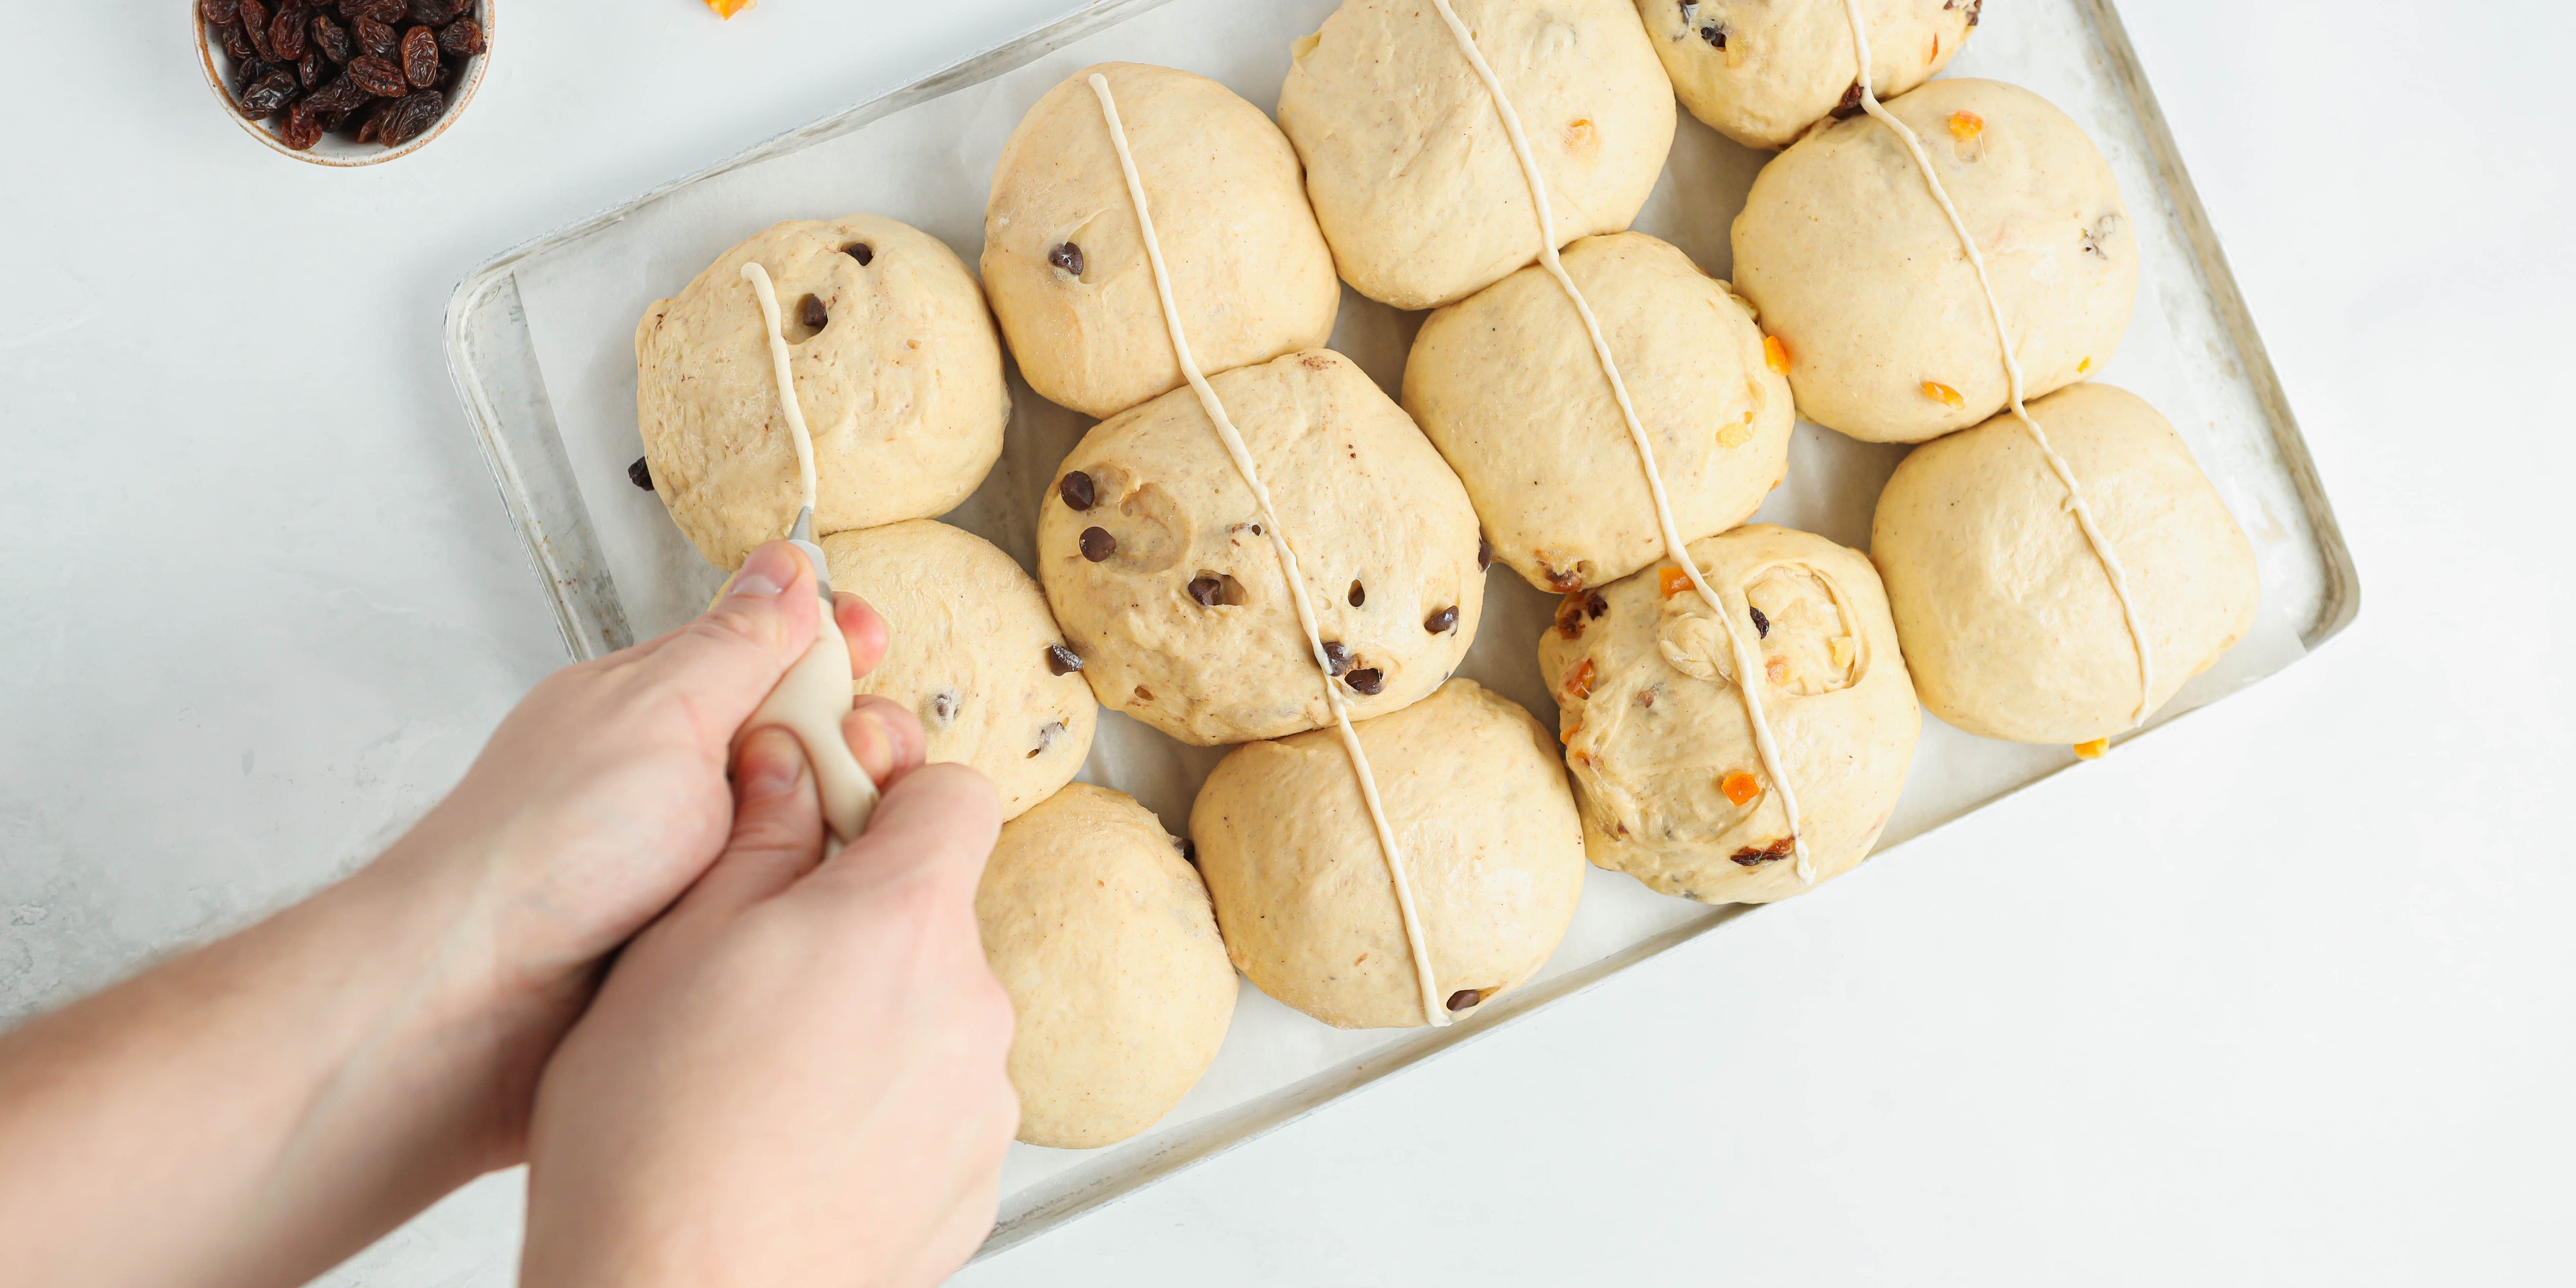 Vegan Hot Cross Buns being piped with a hand holding a piping bag, ready to bake in the oven